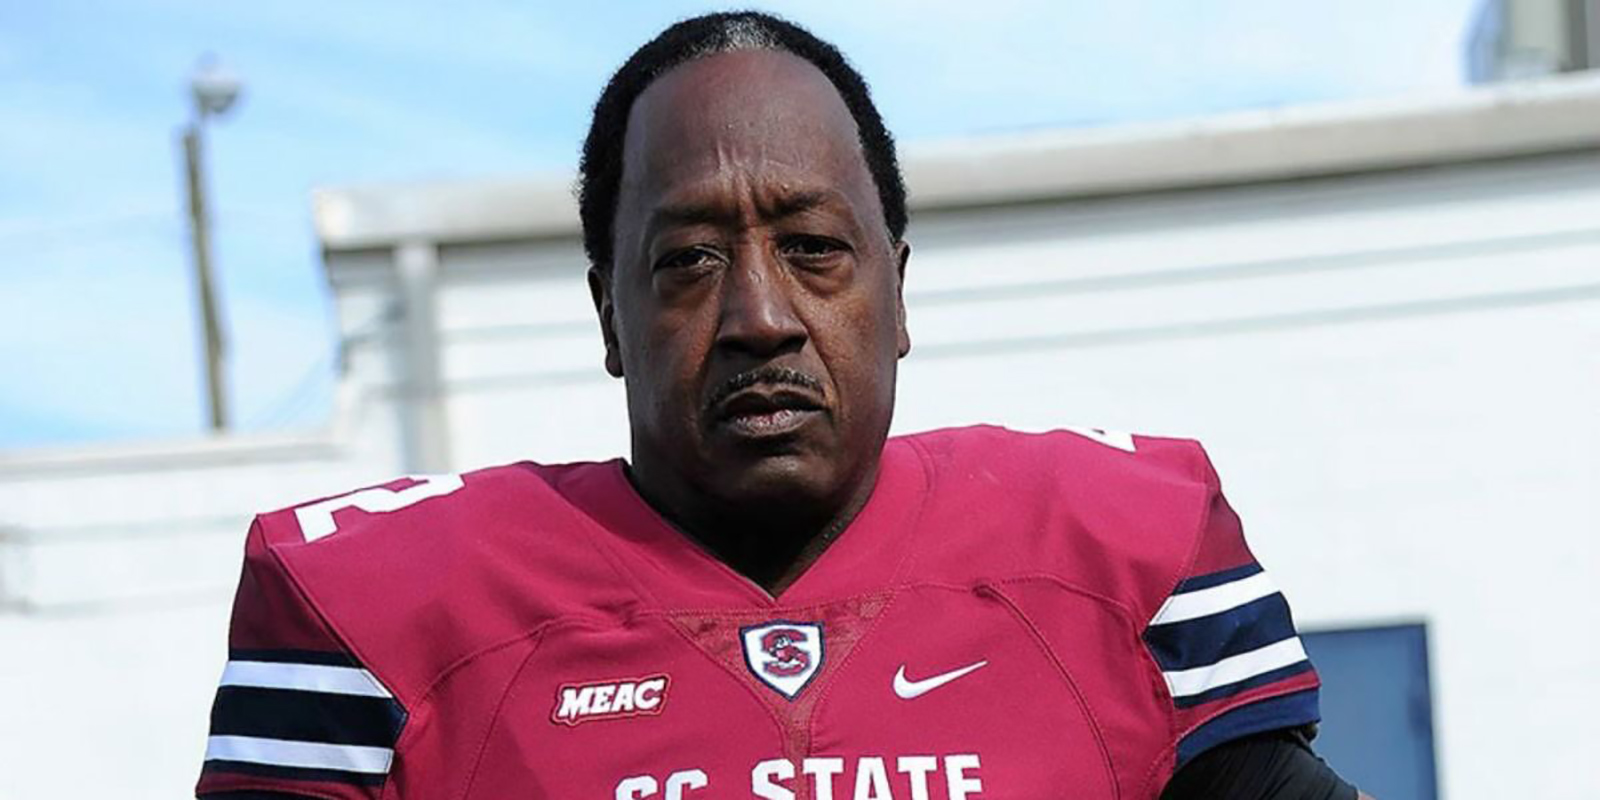 Super Senior Day 55 Year Old Becomes Oldest D1 Football Player Ever